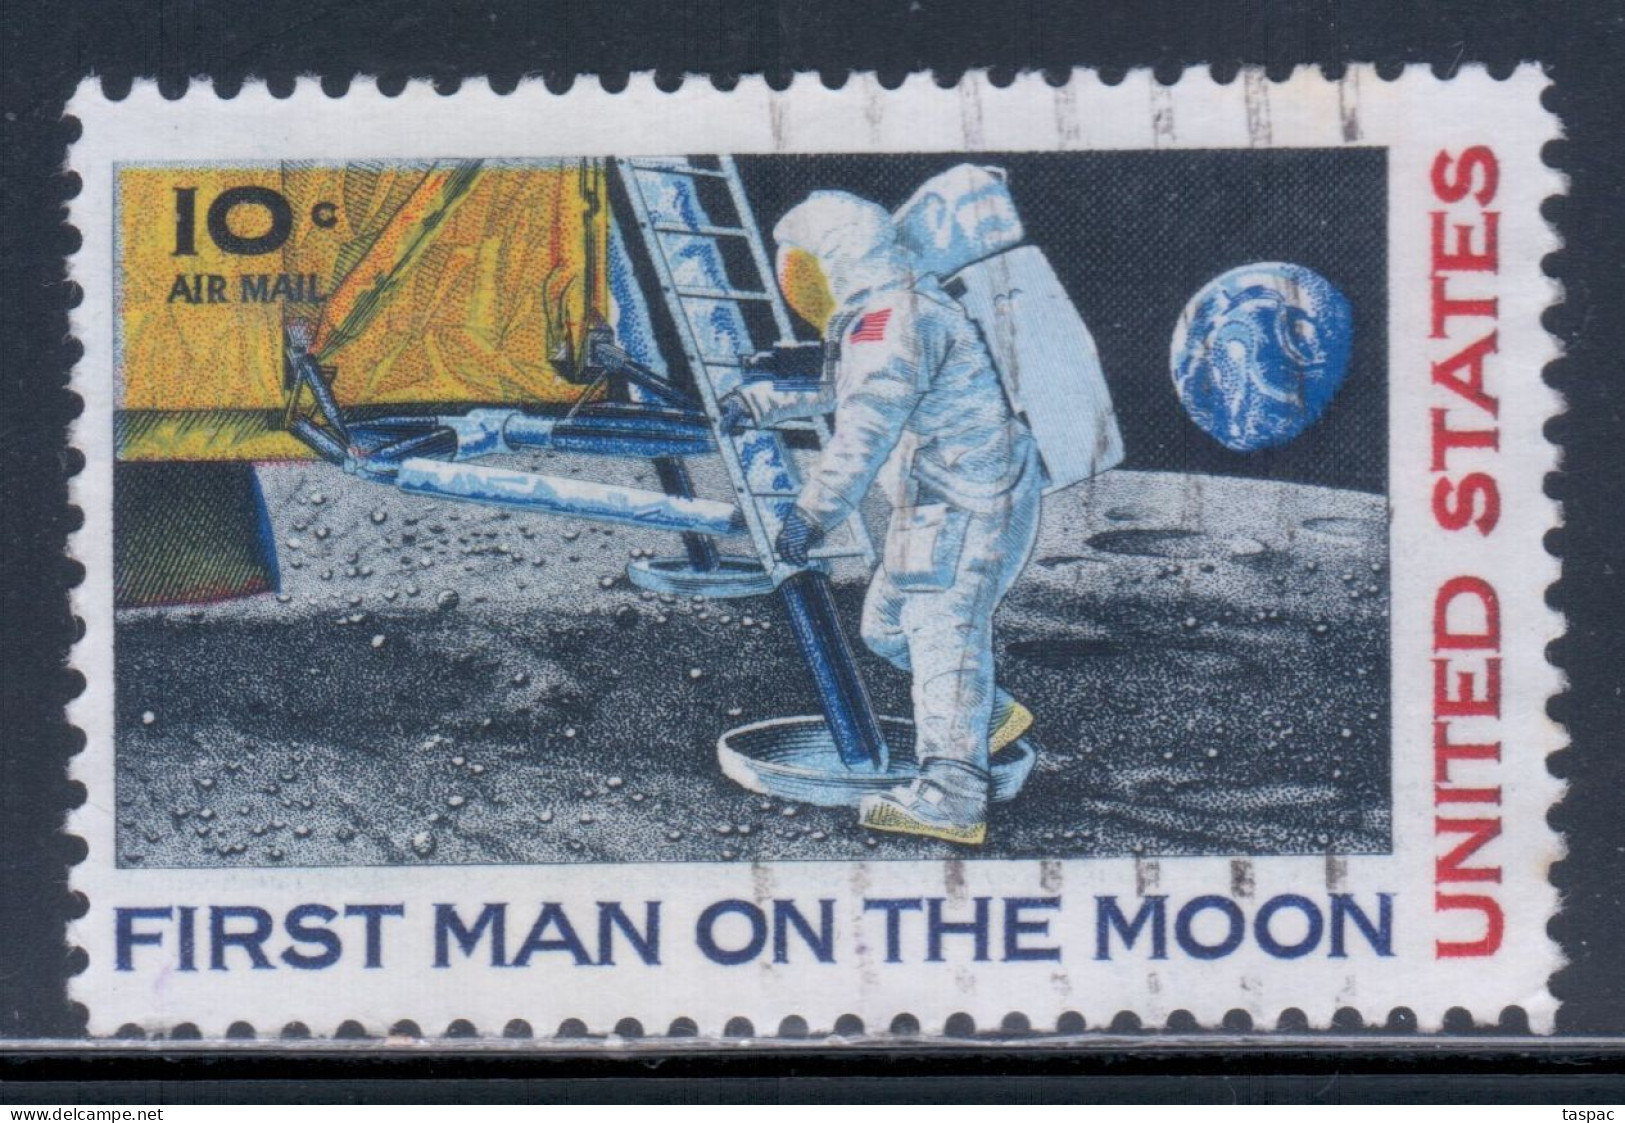 United States 1969 Mi# 990 Used - First Man On The Moon / Space - United States